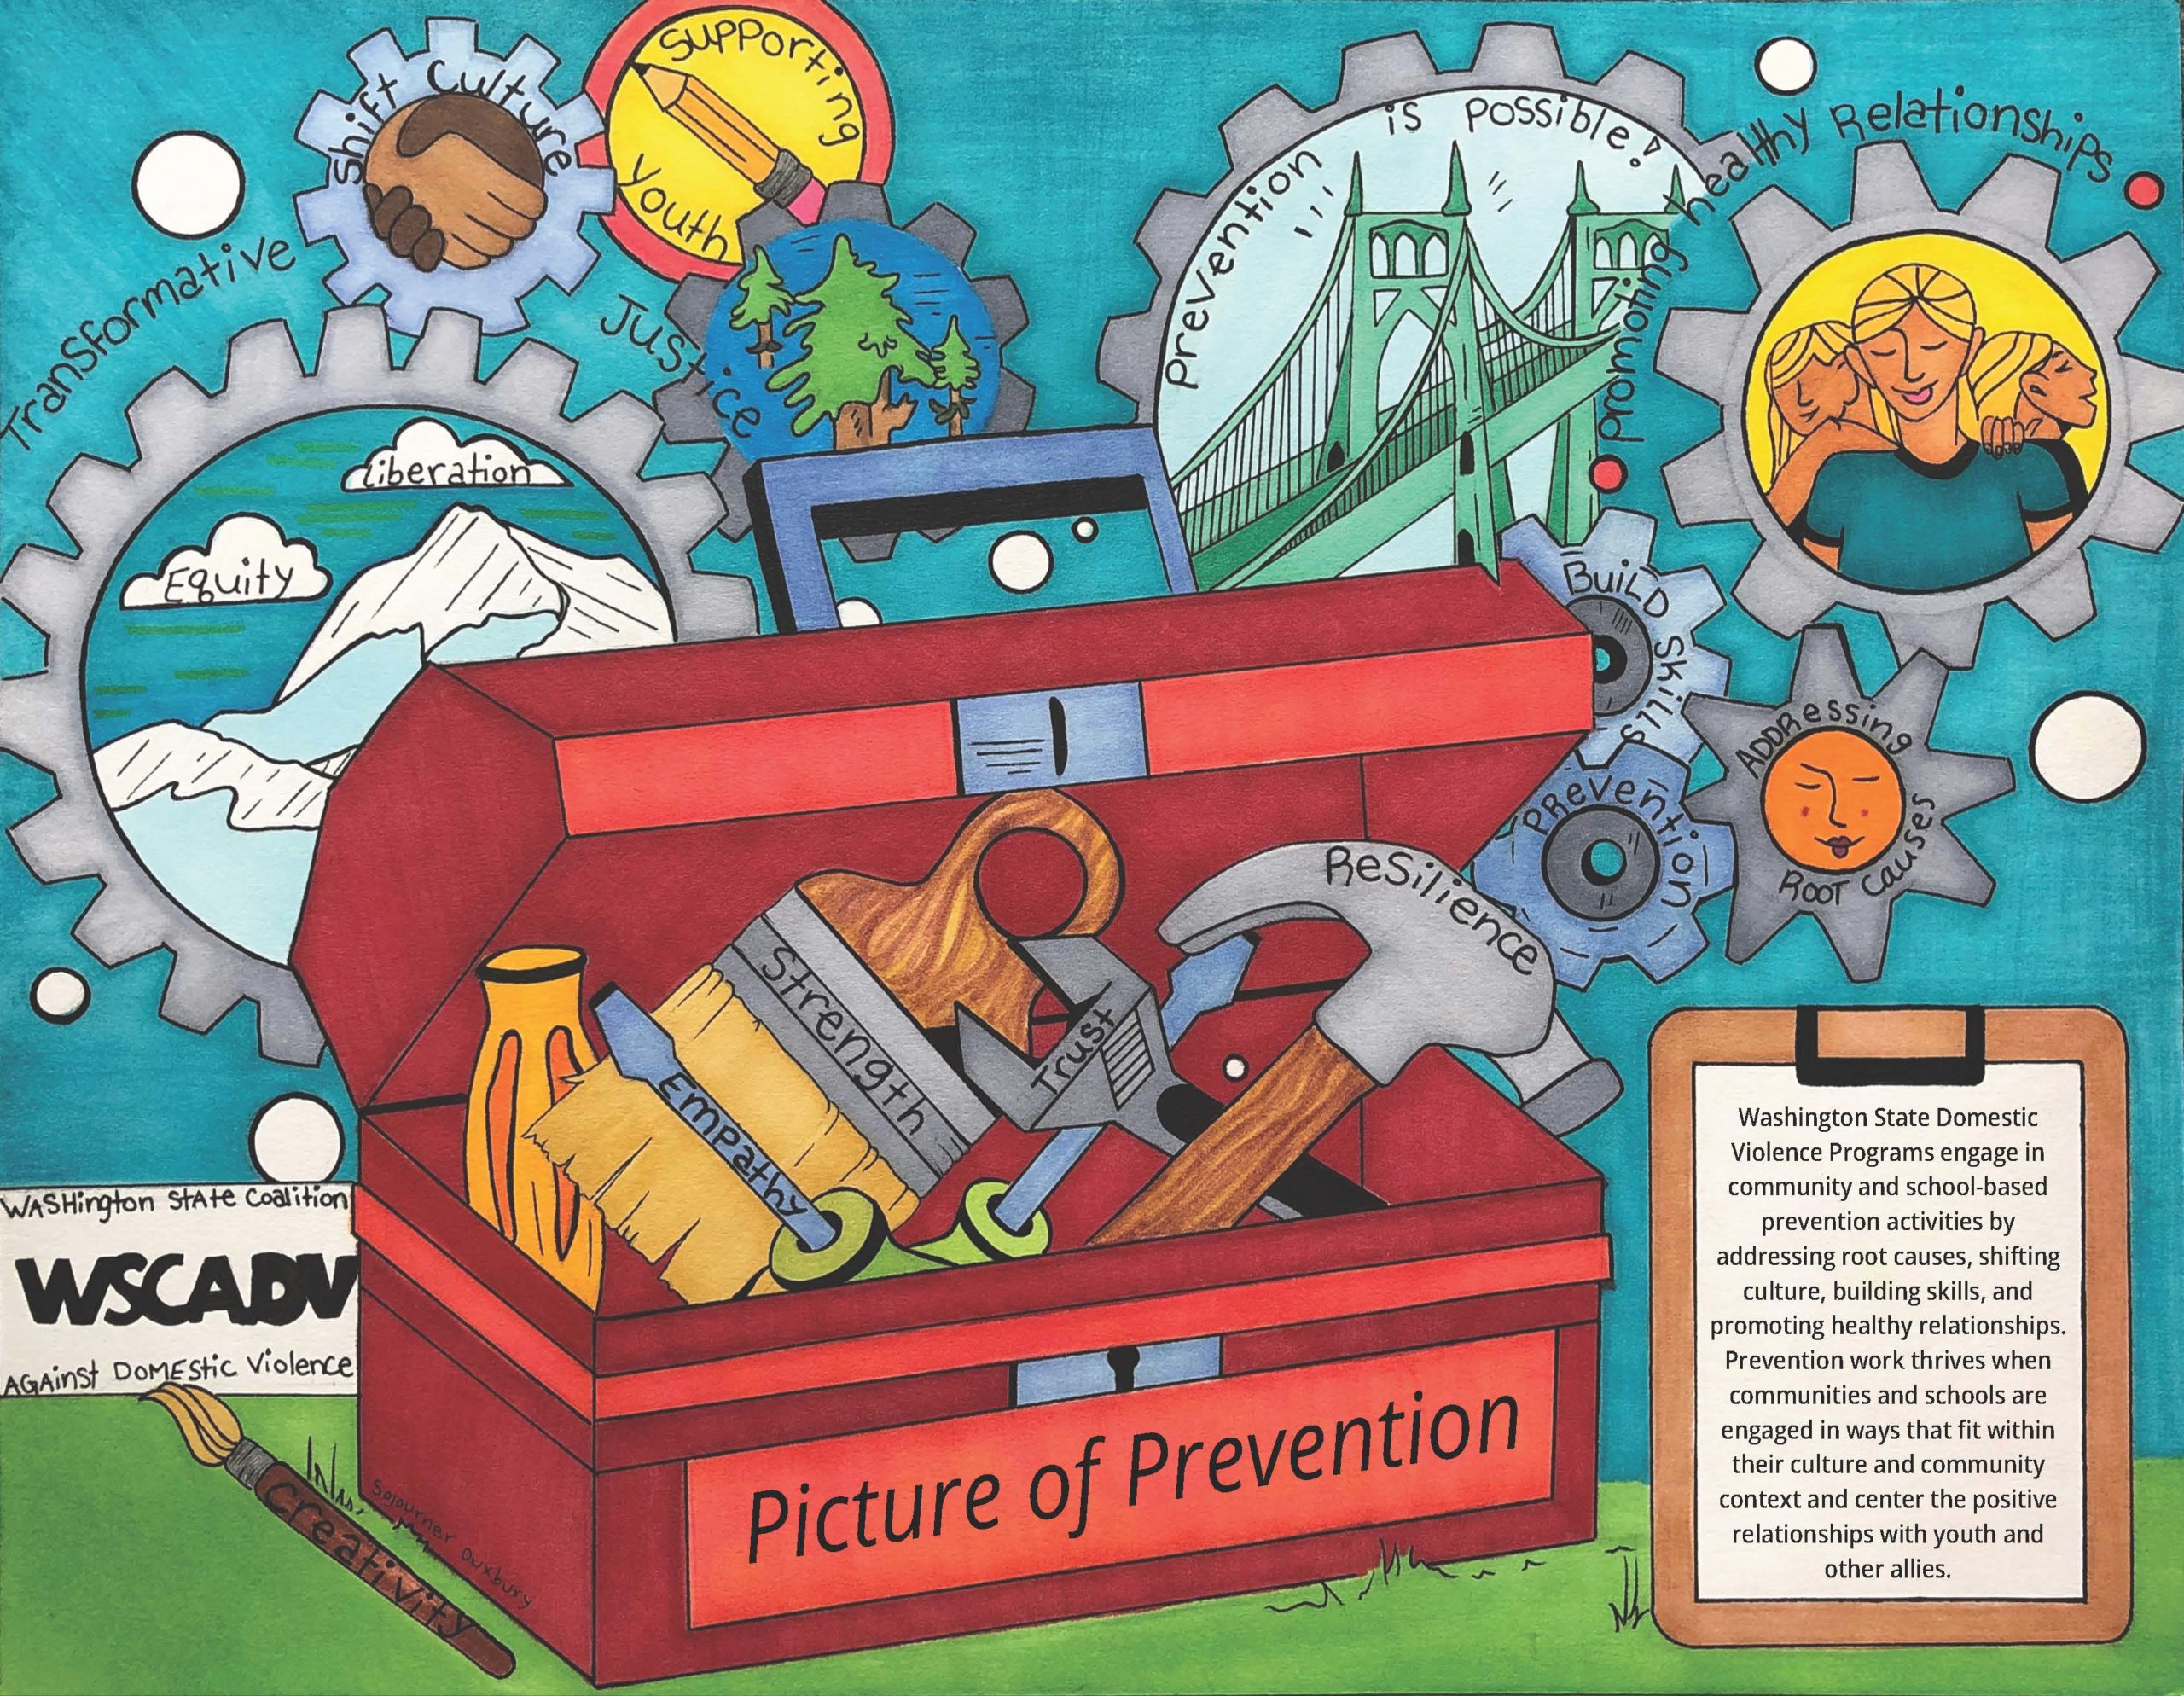 Illustration of a prevention "toolbox" depicting various "tools" to end DV, such as "shift culture," "supporting youth," etc.